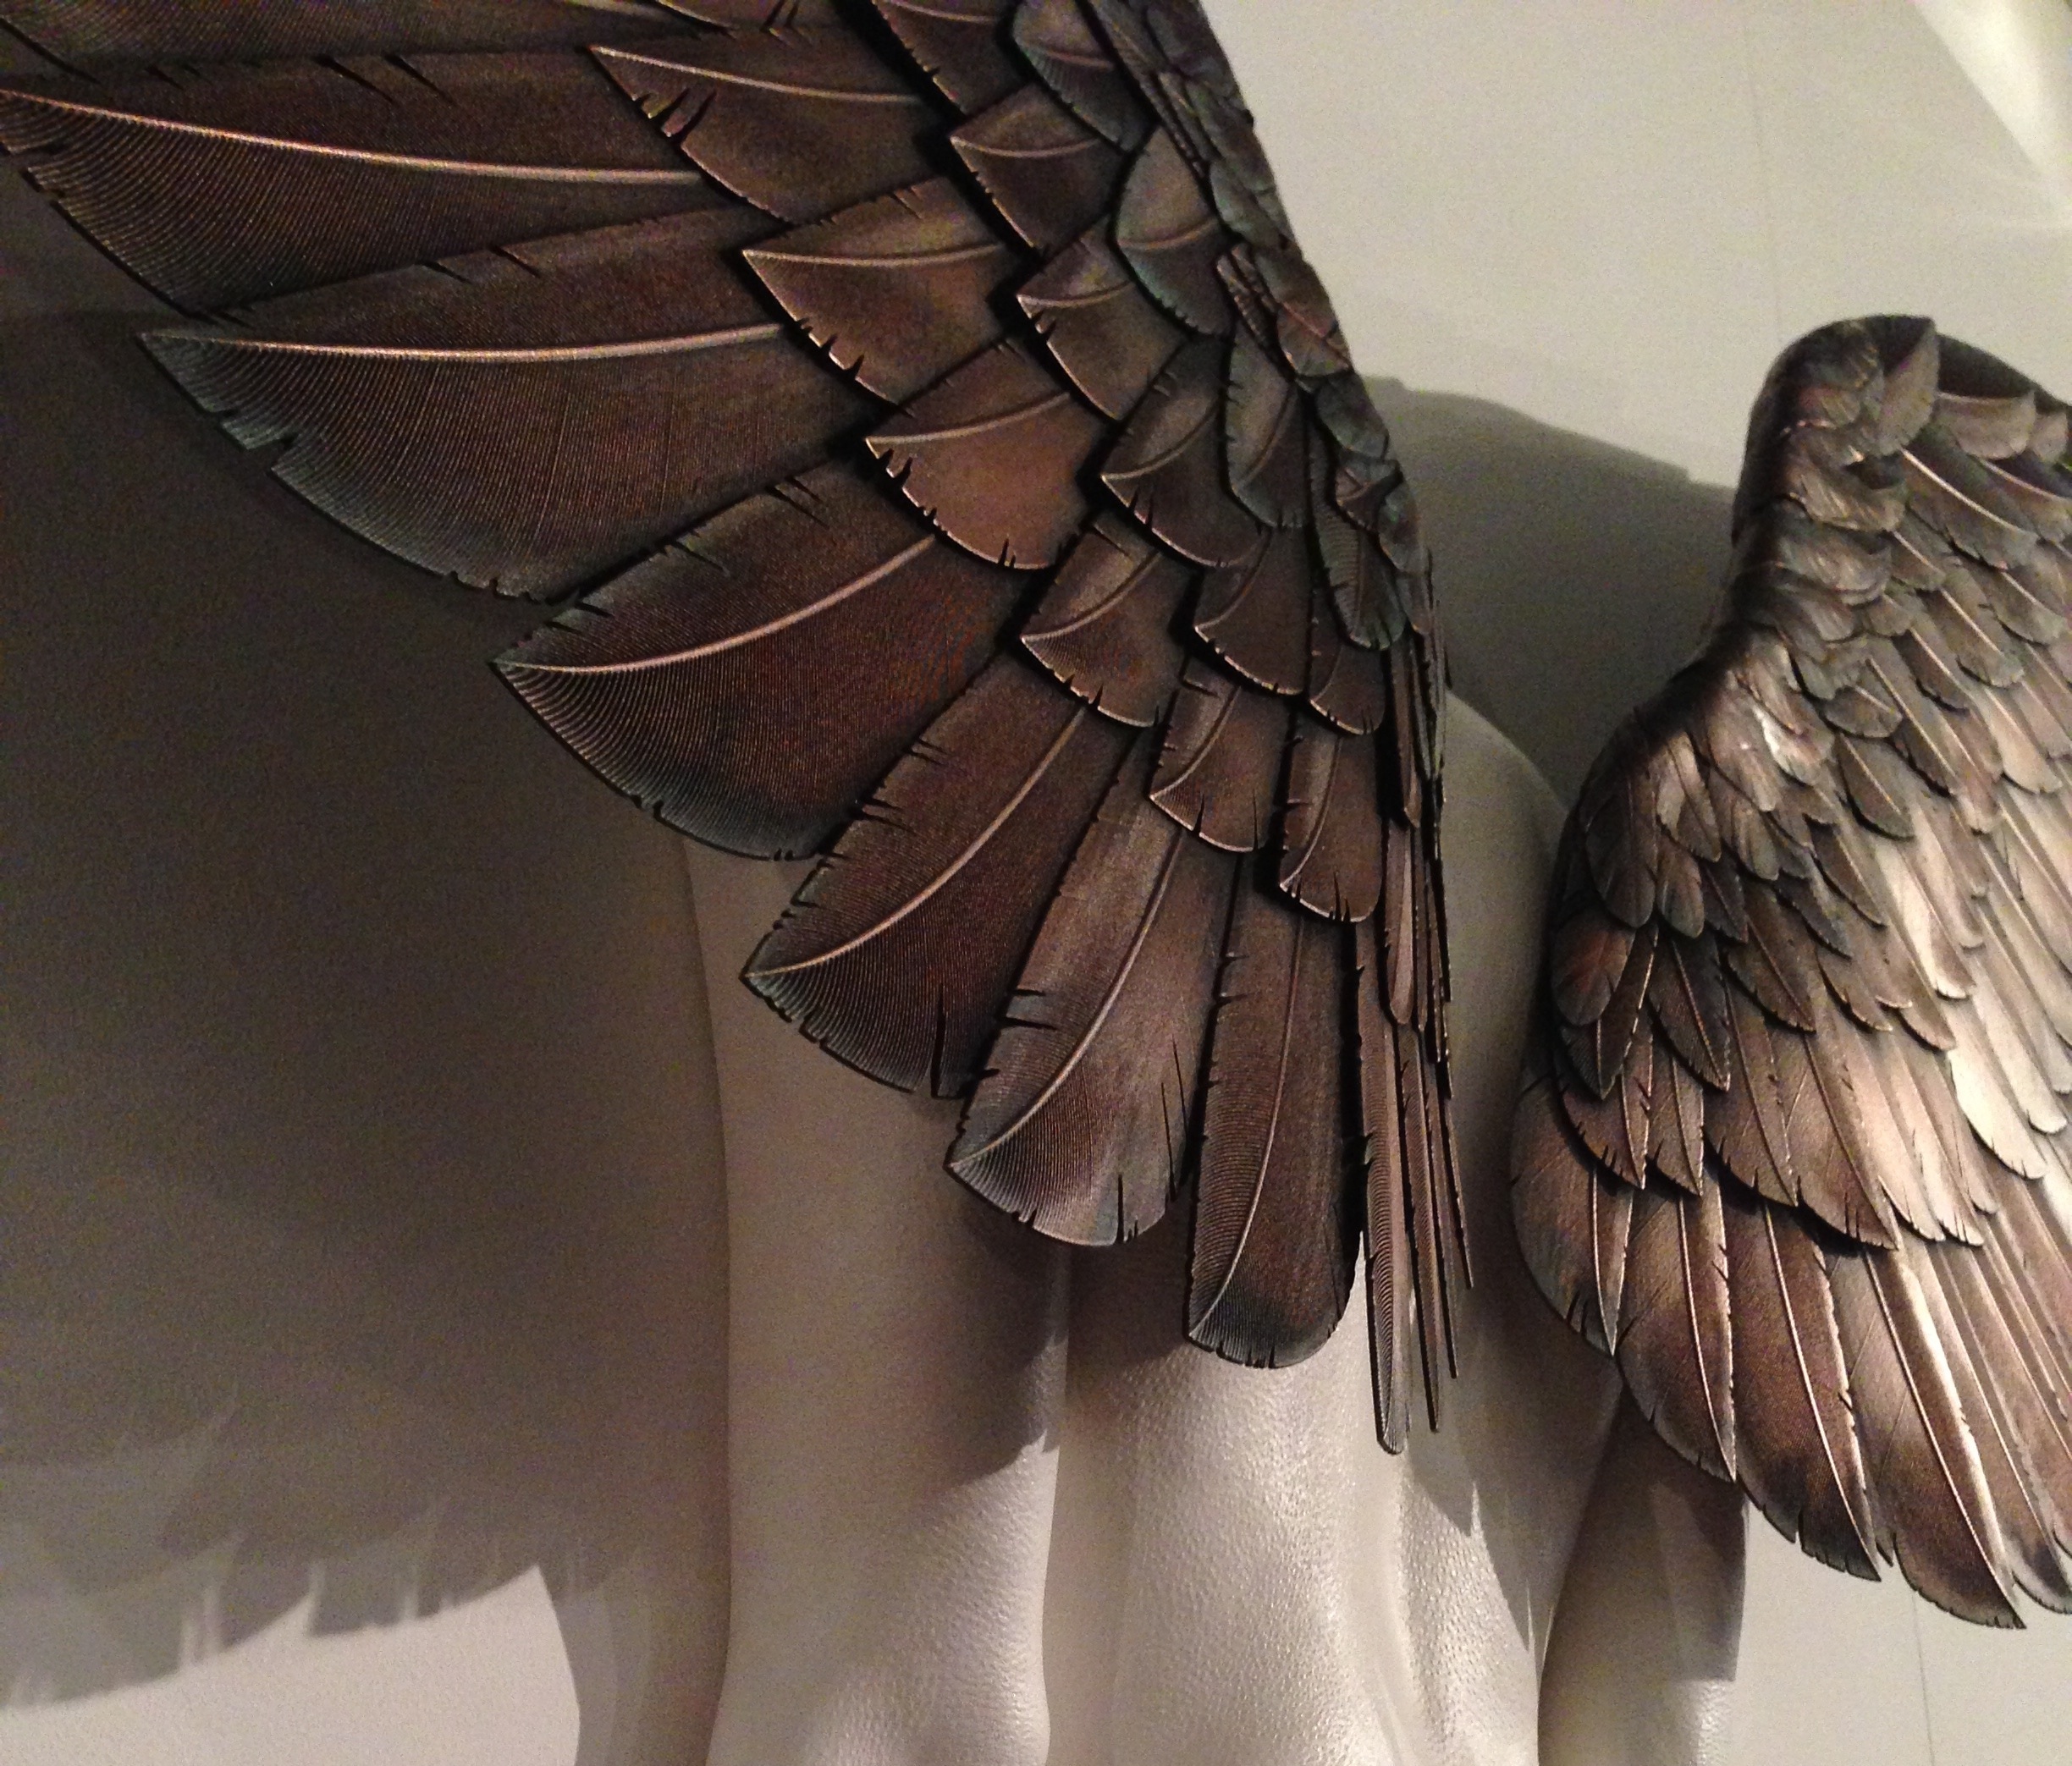 3D Print show – Icarus had a sister feathers